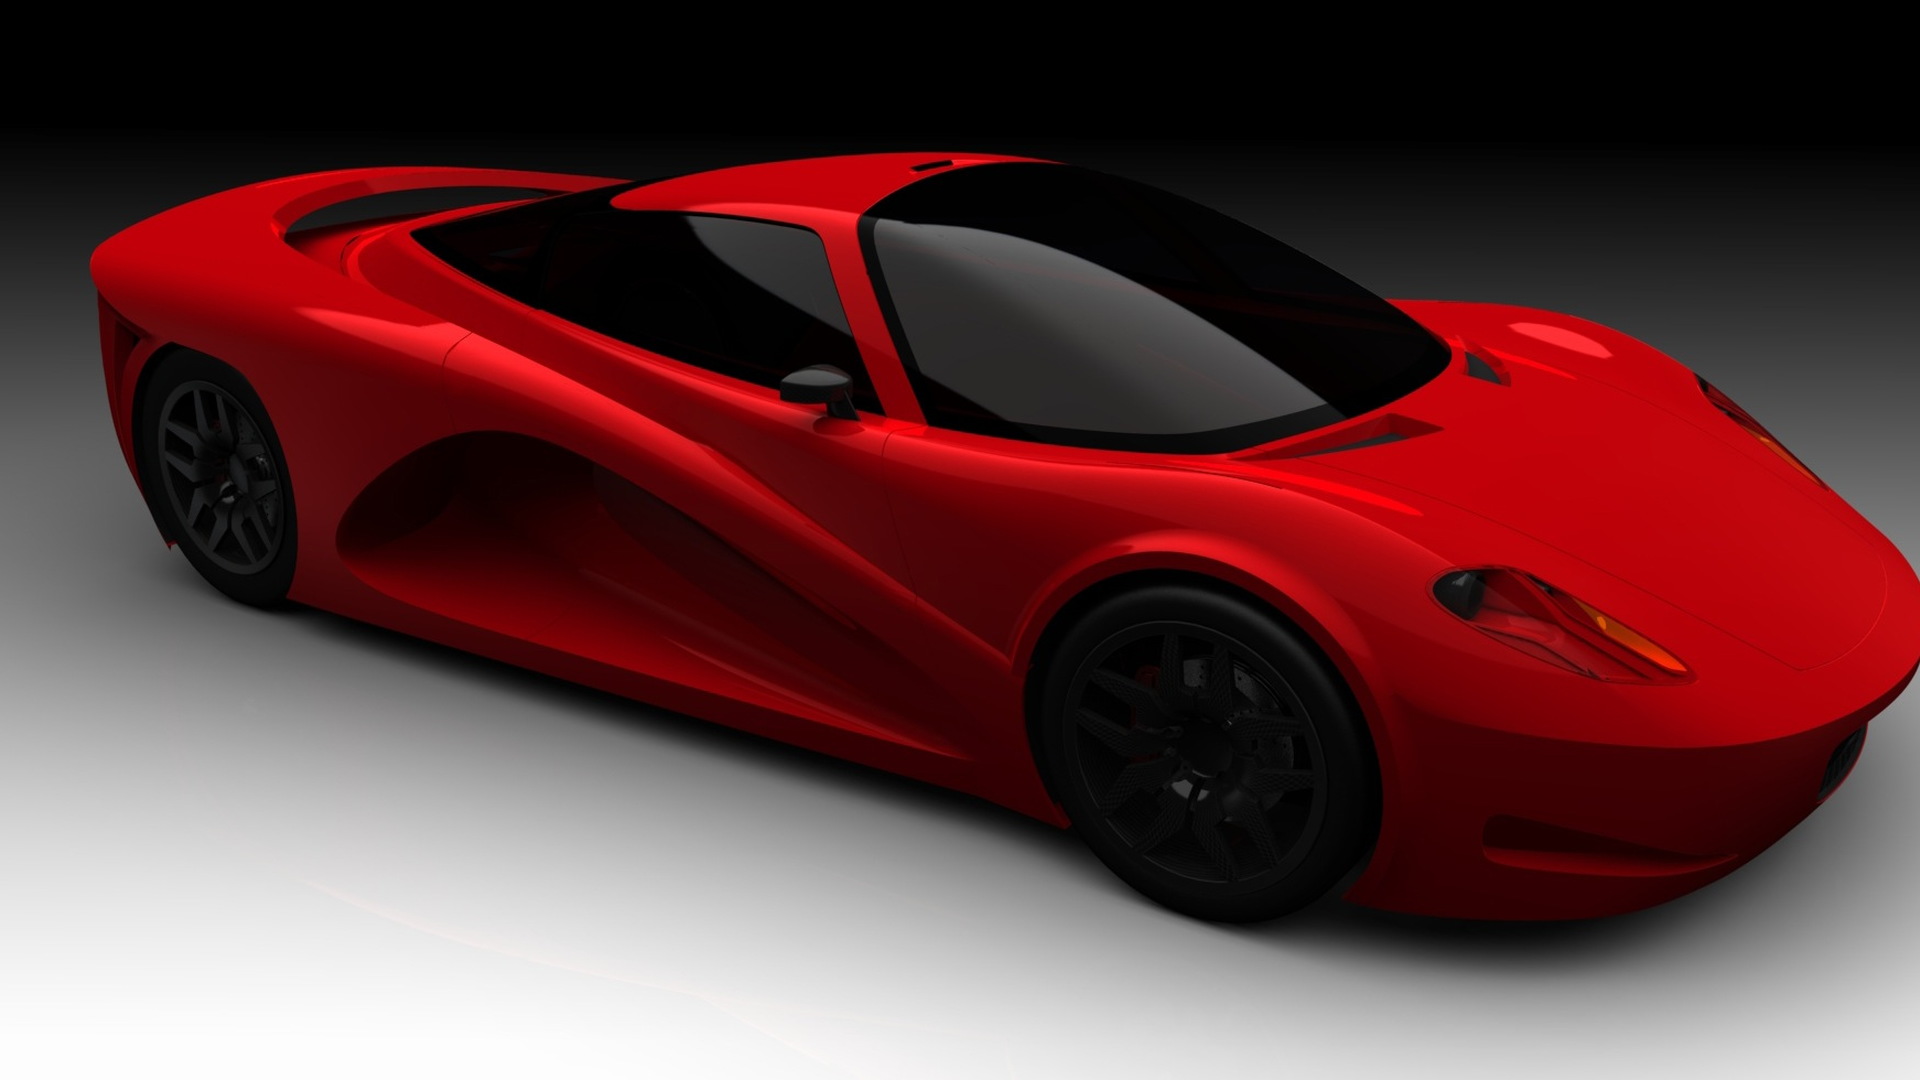 Velozzi Supercar, to be fitted with Capstone C65 microturbine, Feb 2010